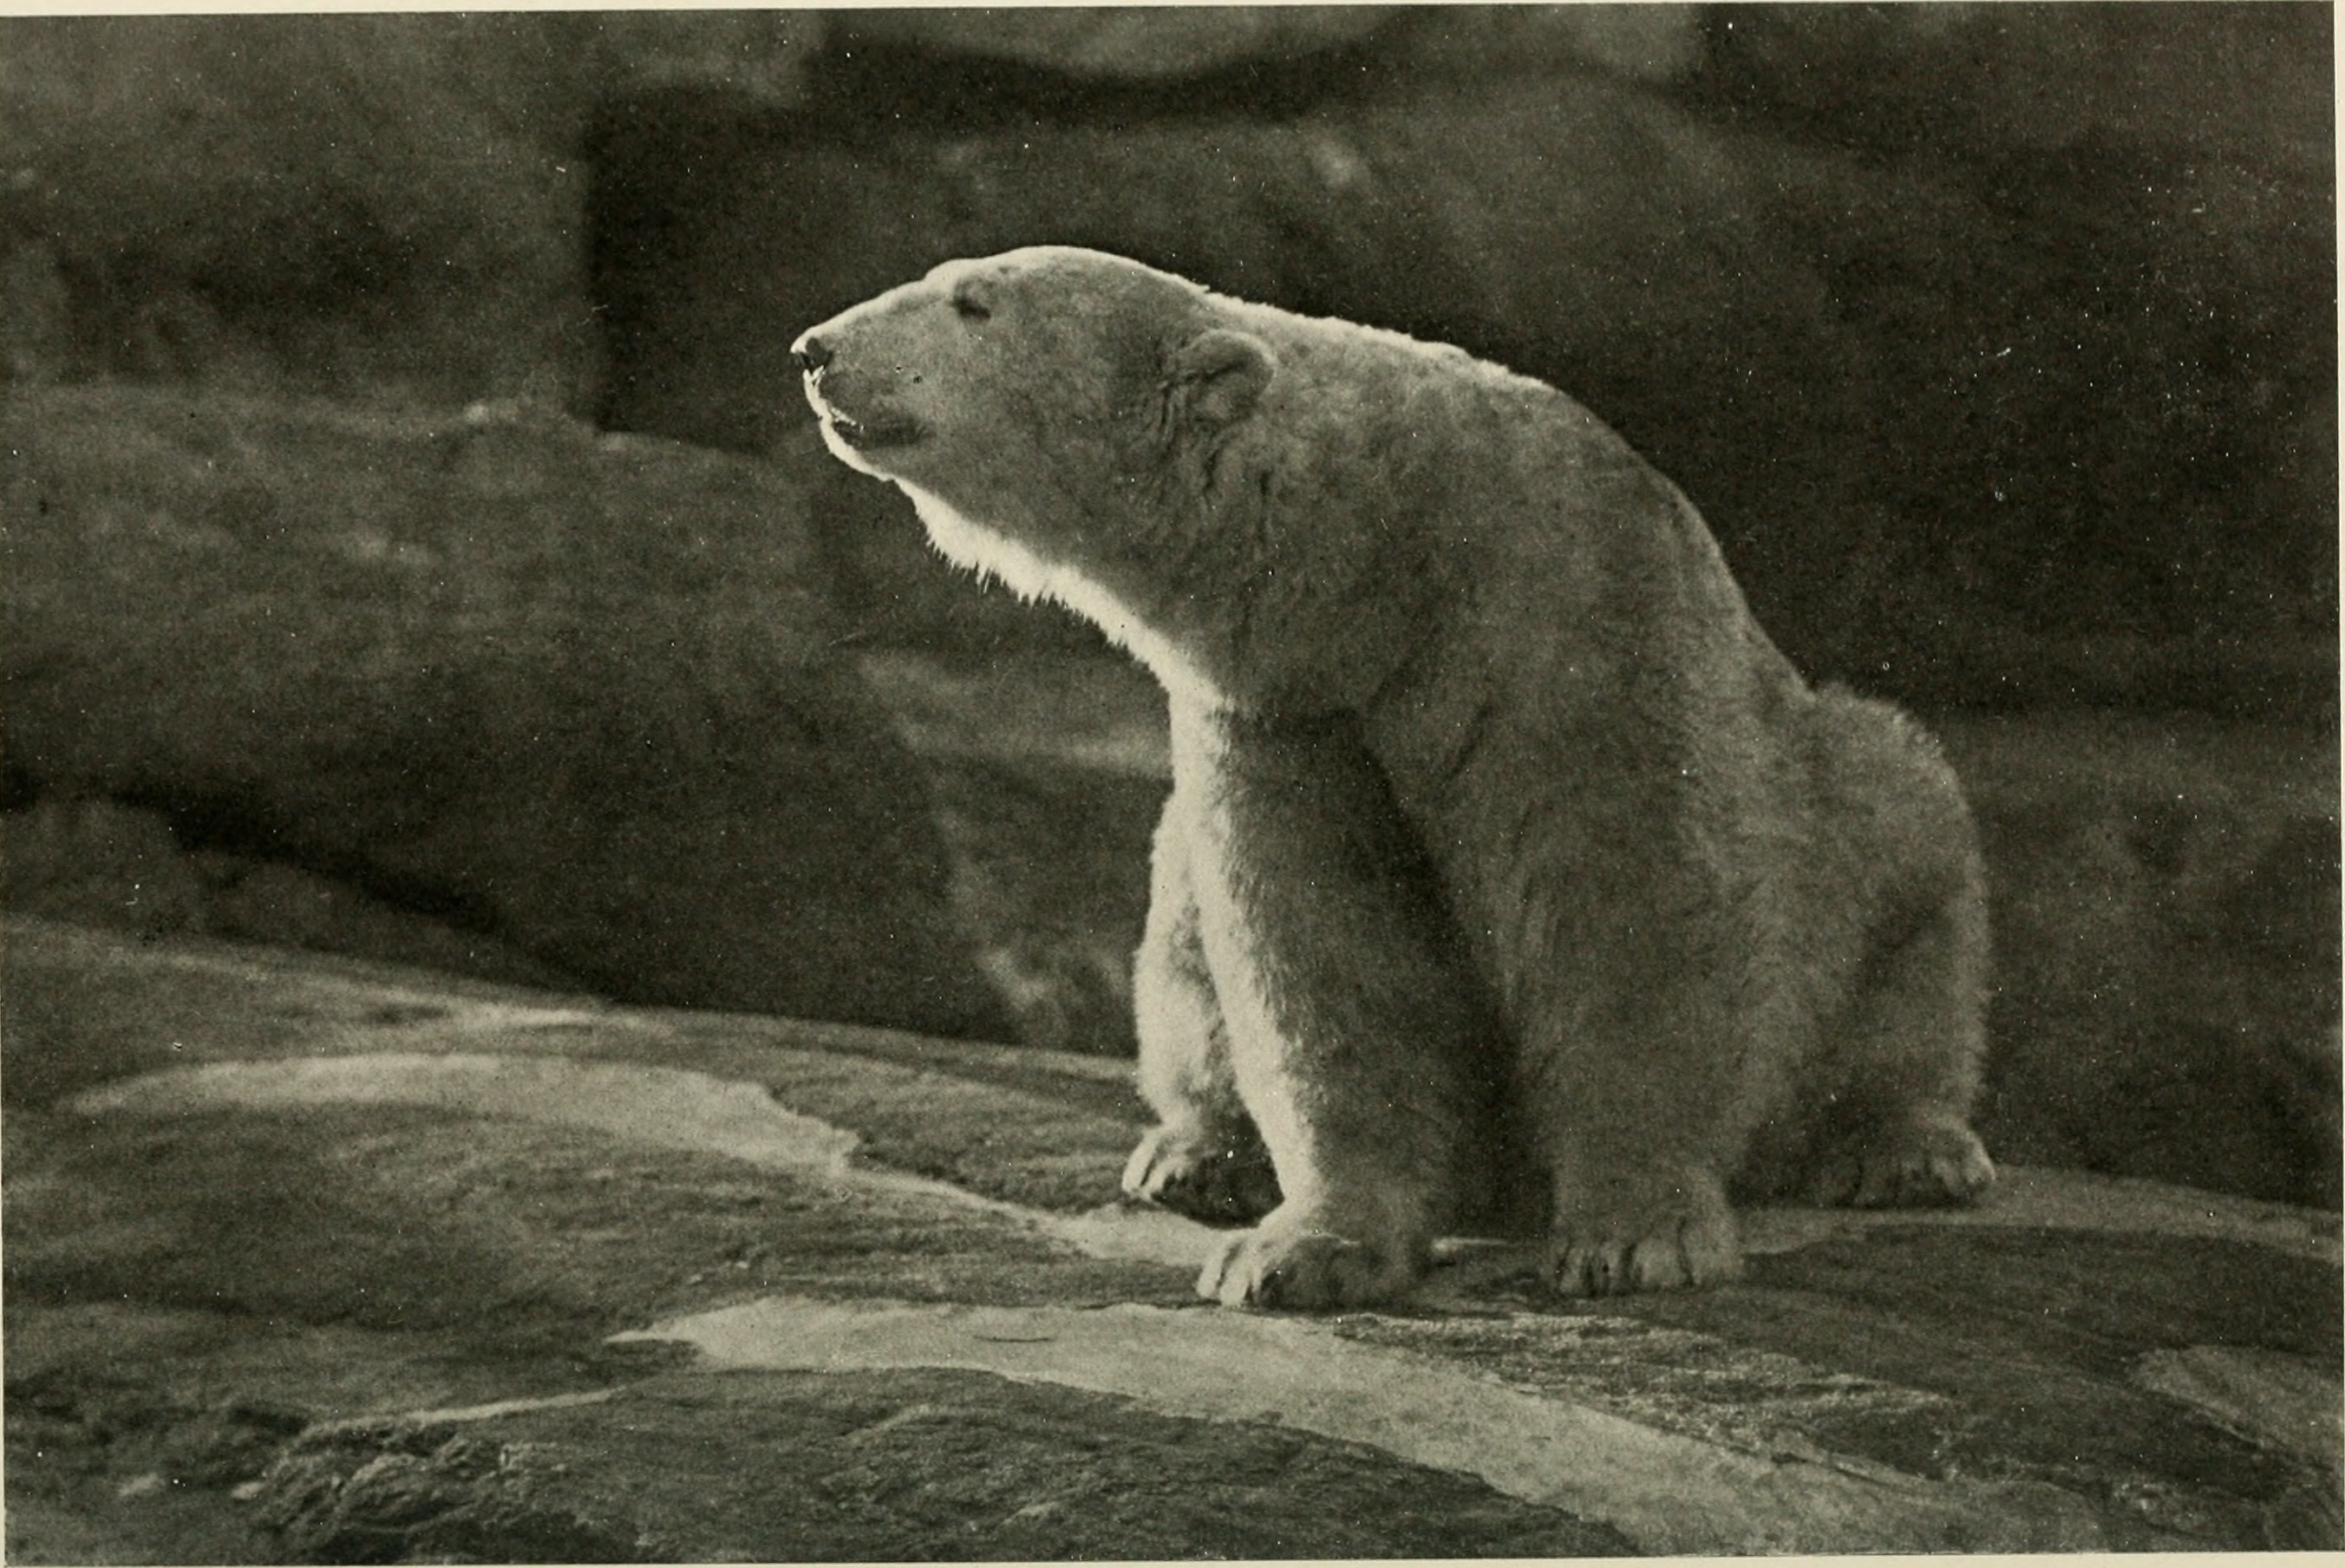 Annual report of the New York Zoological Society